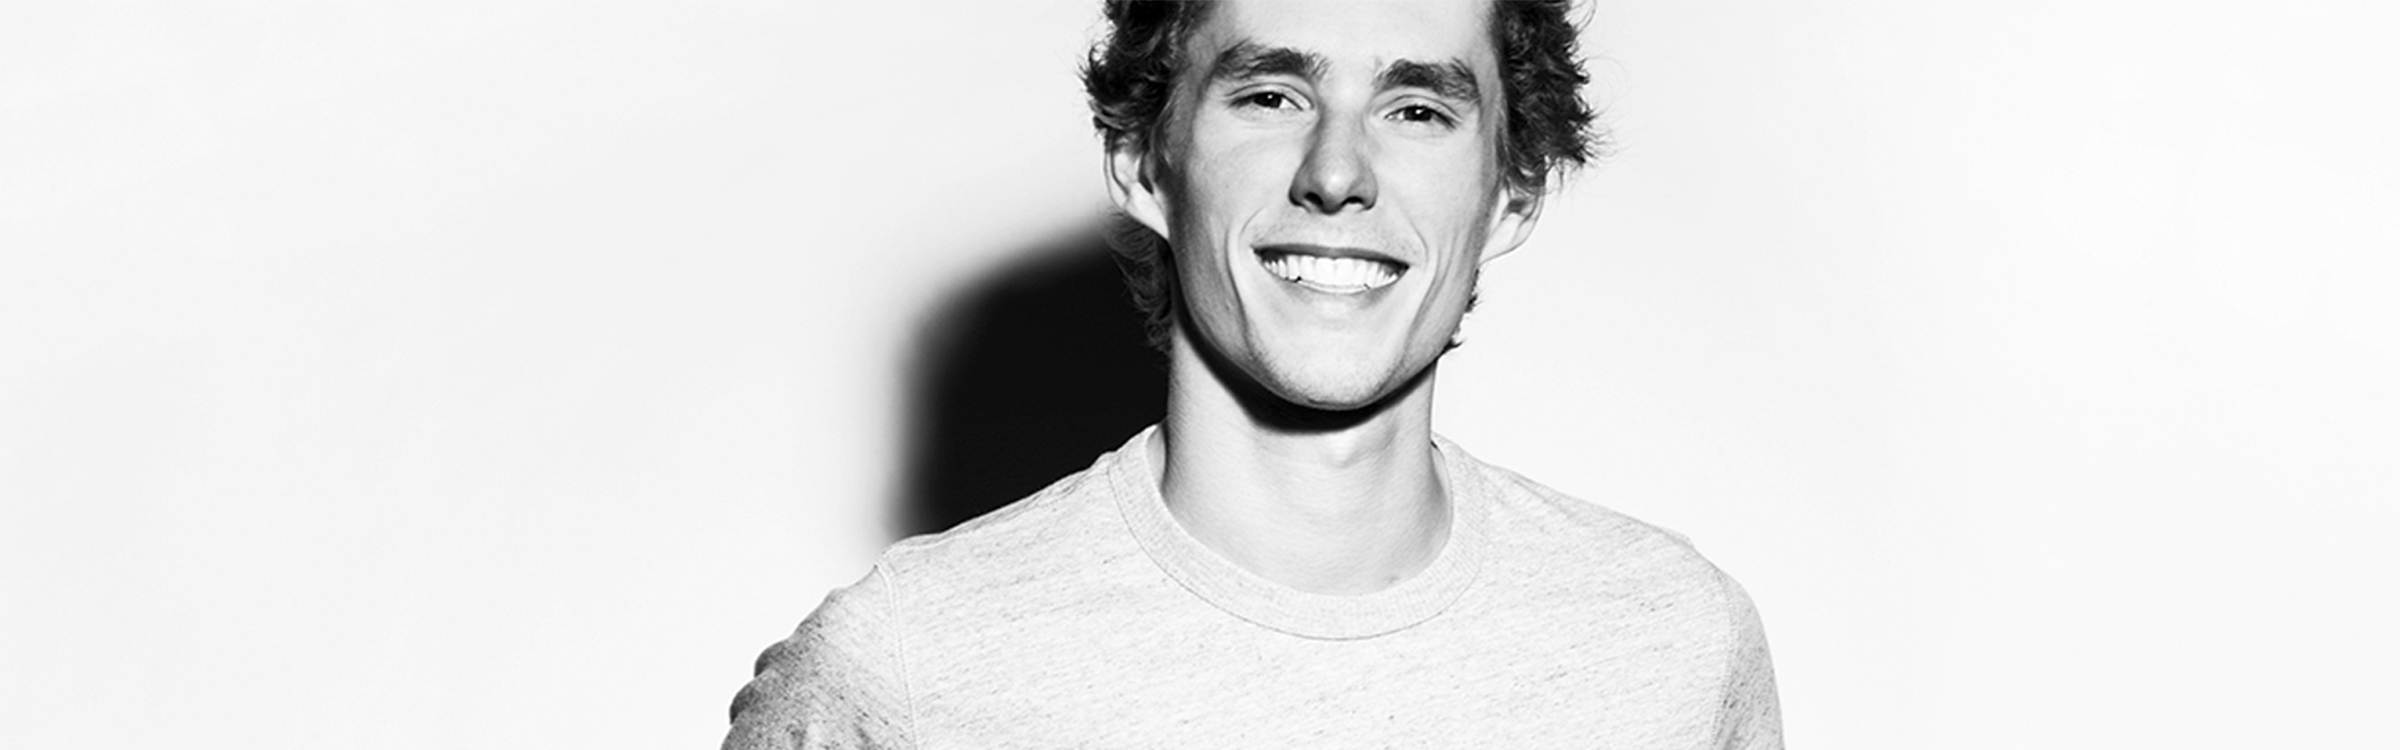 Lost frequencies